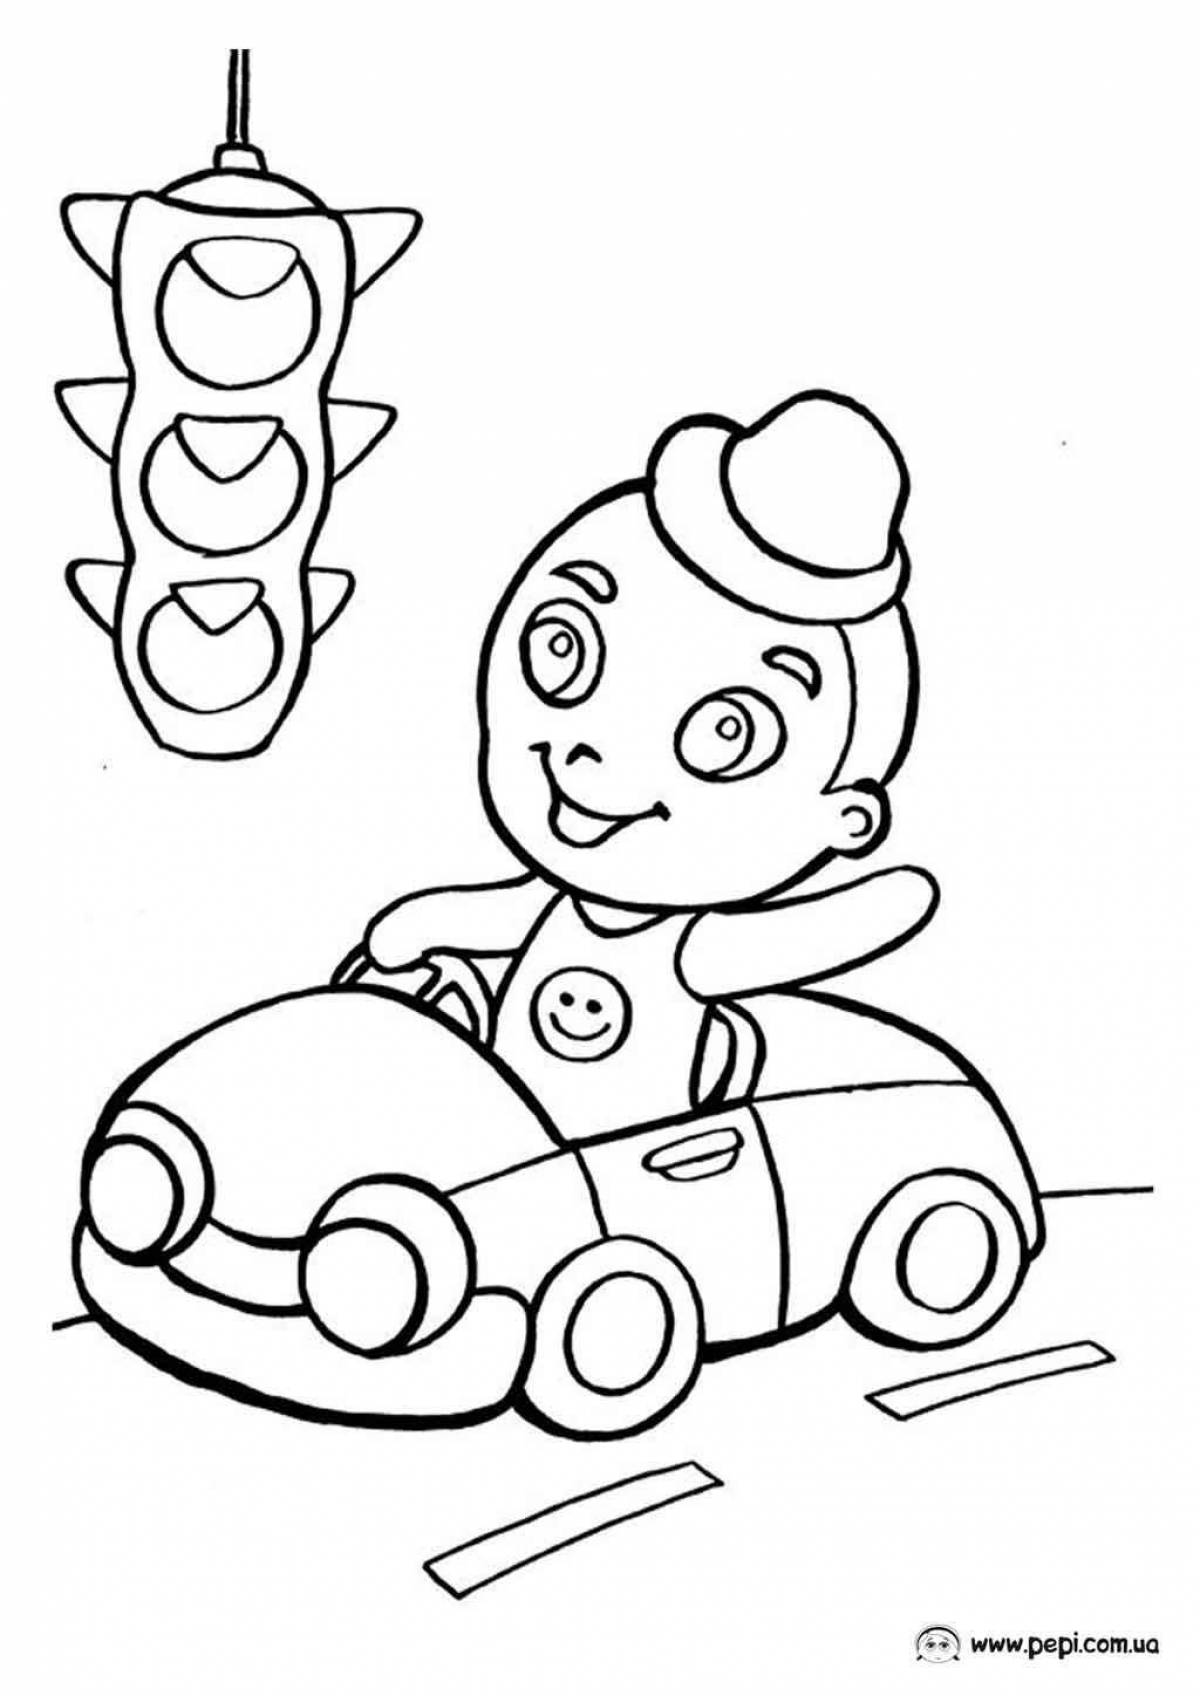 Playful traffic rules coloring page